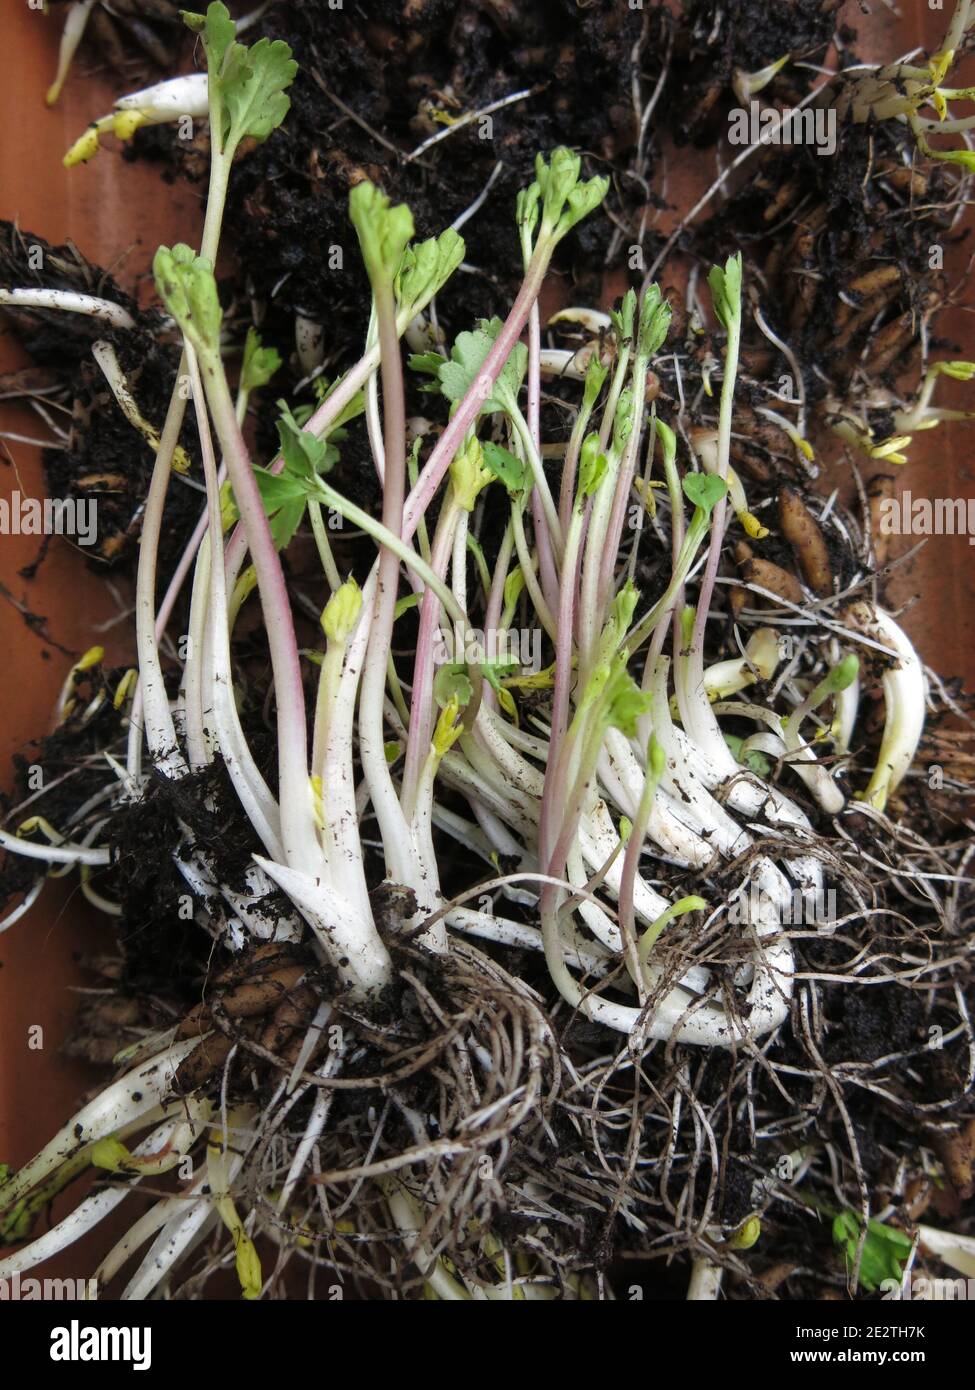 Spring-time planting in the green; close-up of a tray of ranunculus corms with shooting tips and fibrous roots, ready for planting in early spring. Stock Photo